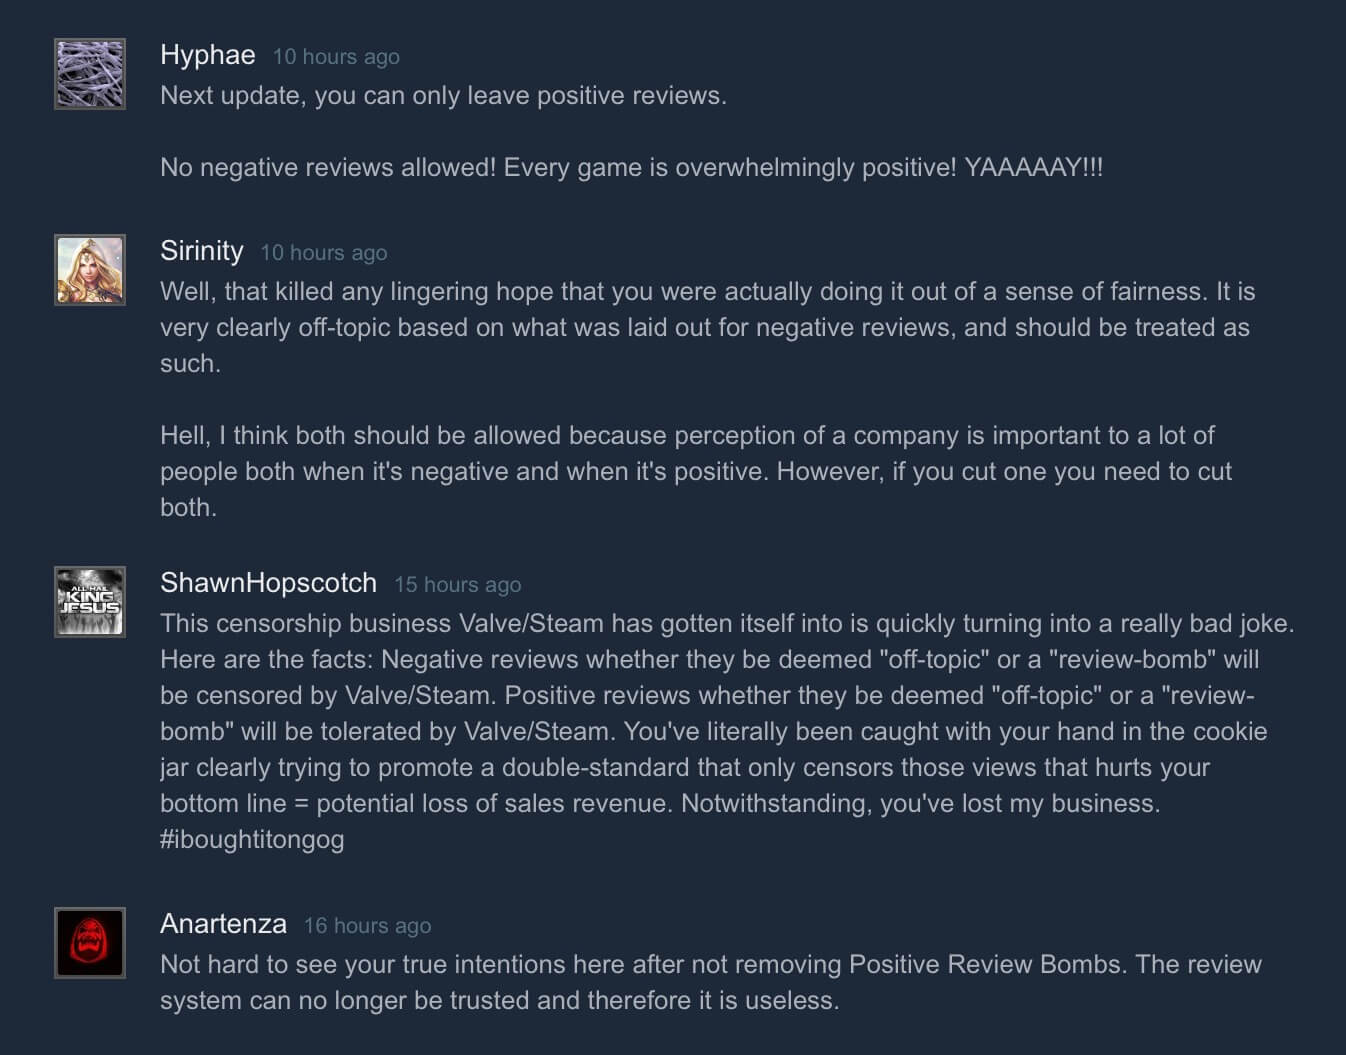 Comments on the Steam Blog criticizing Valve’s decision to remove “negative remove bombs” from the Steam Review score while allowing some “positive review bombs.”